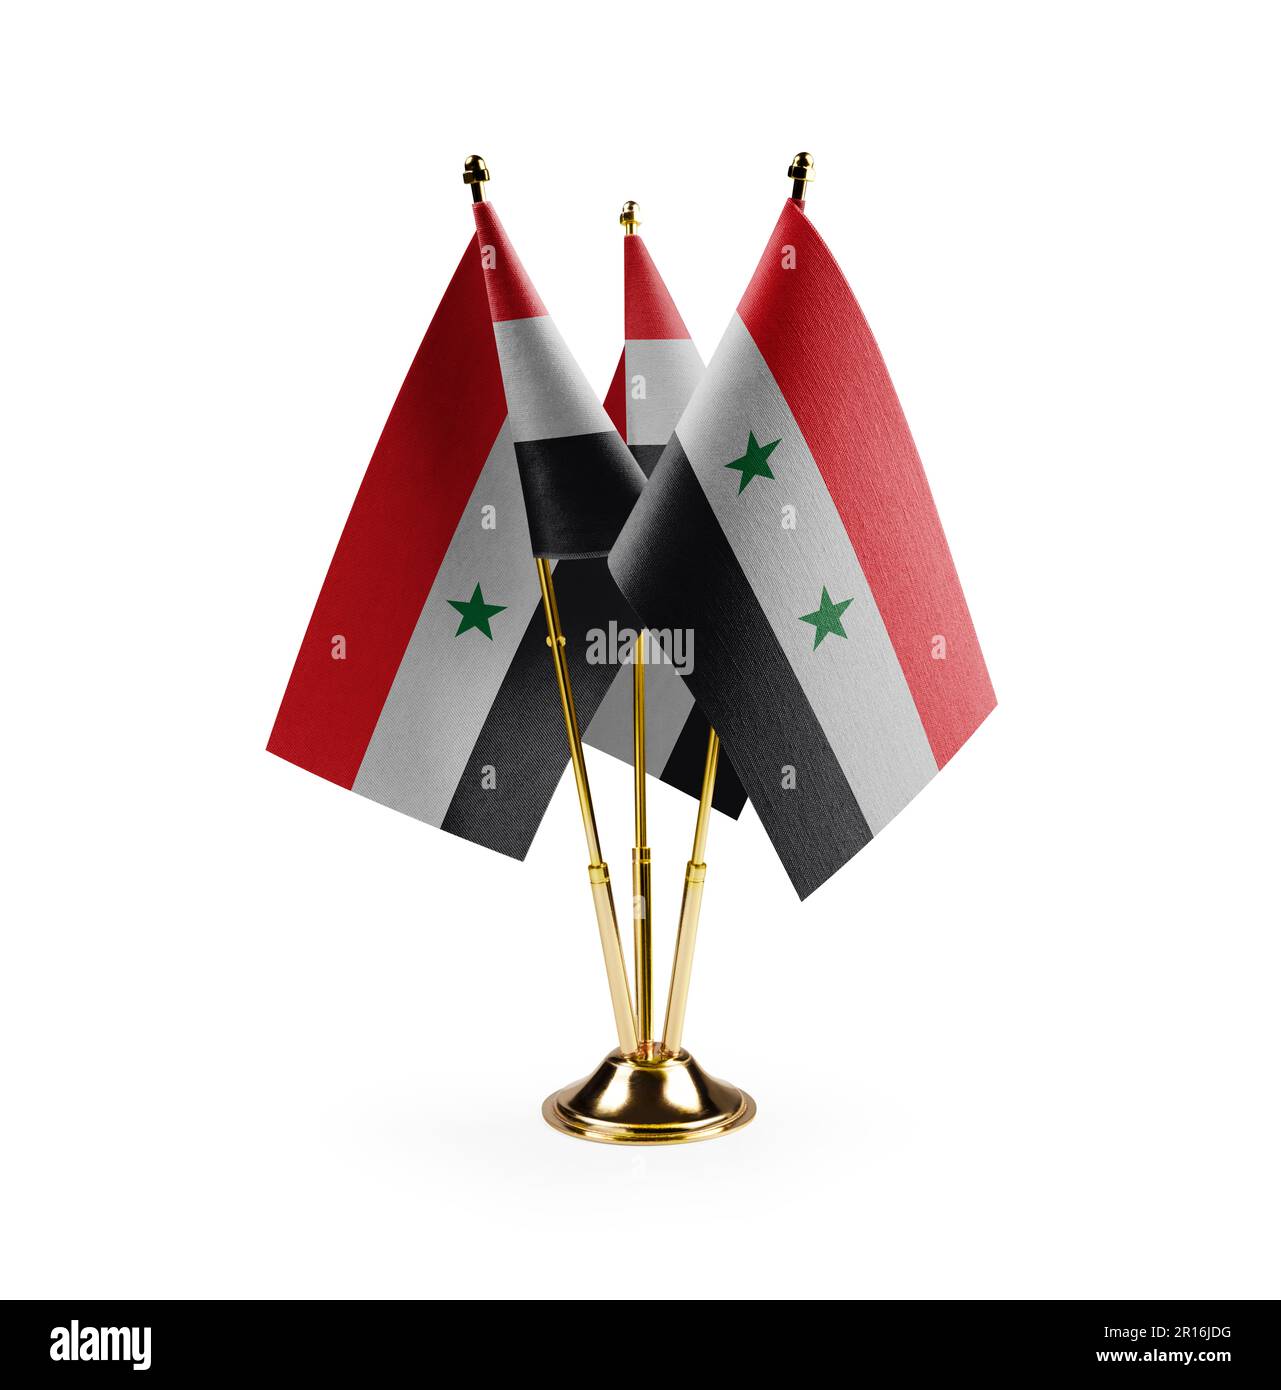 Syria flag set, simple flags of Syria with three different effects